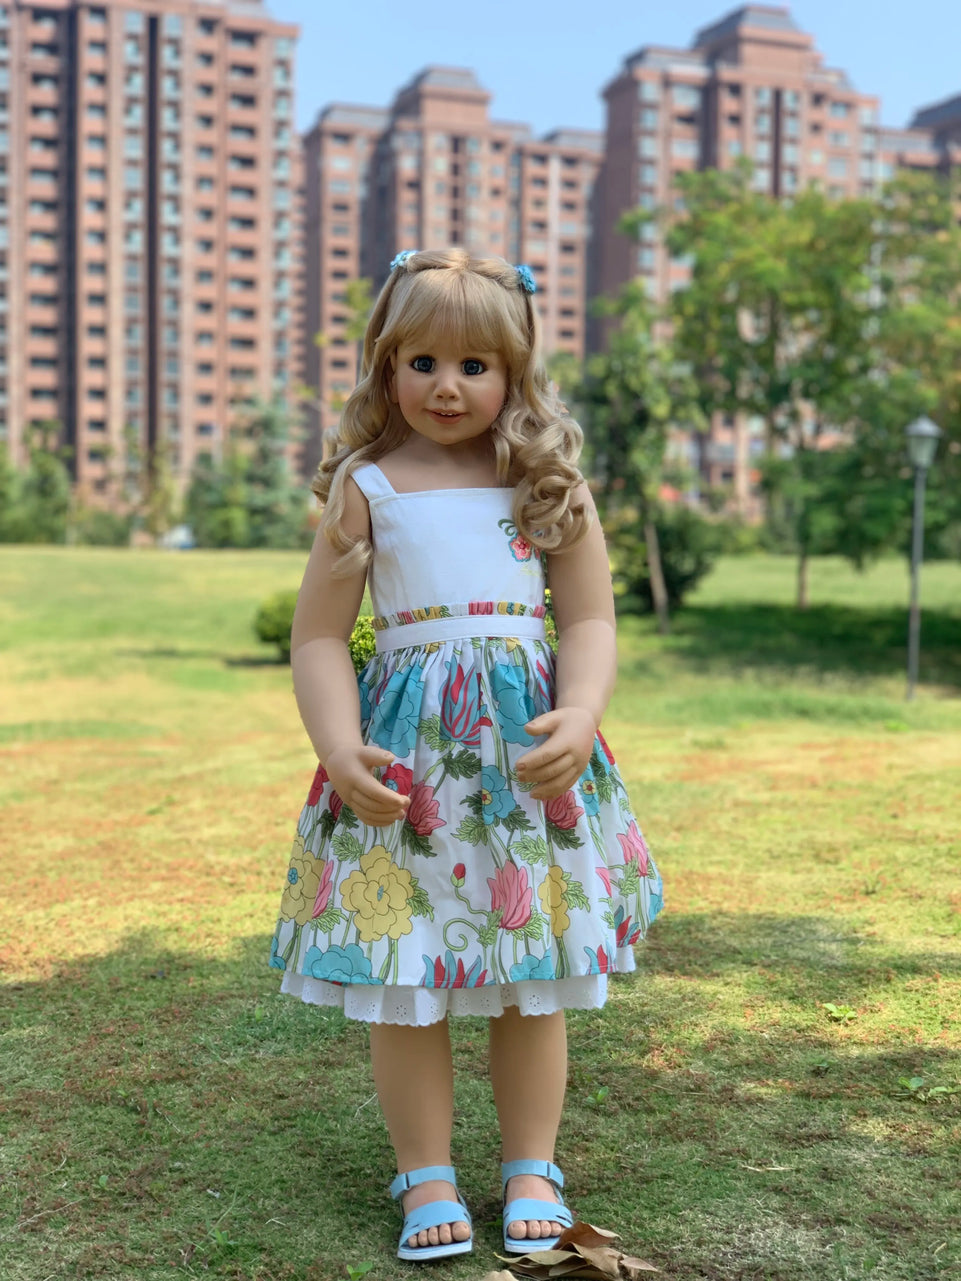 100CM Hard vinyl toddler princess girl doll toy like real 3-year-old size child clothing photo model big dress up doll baby gift